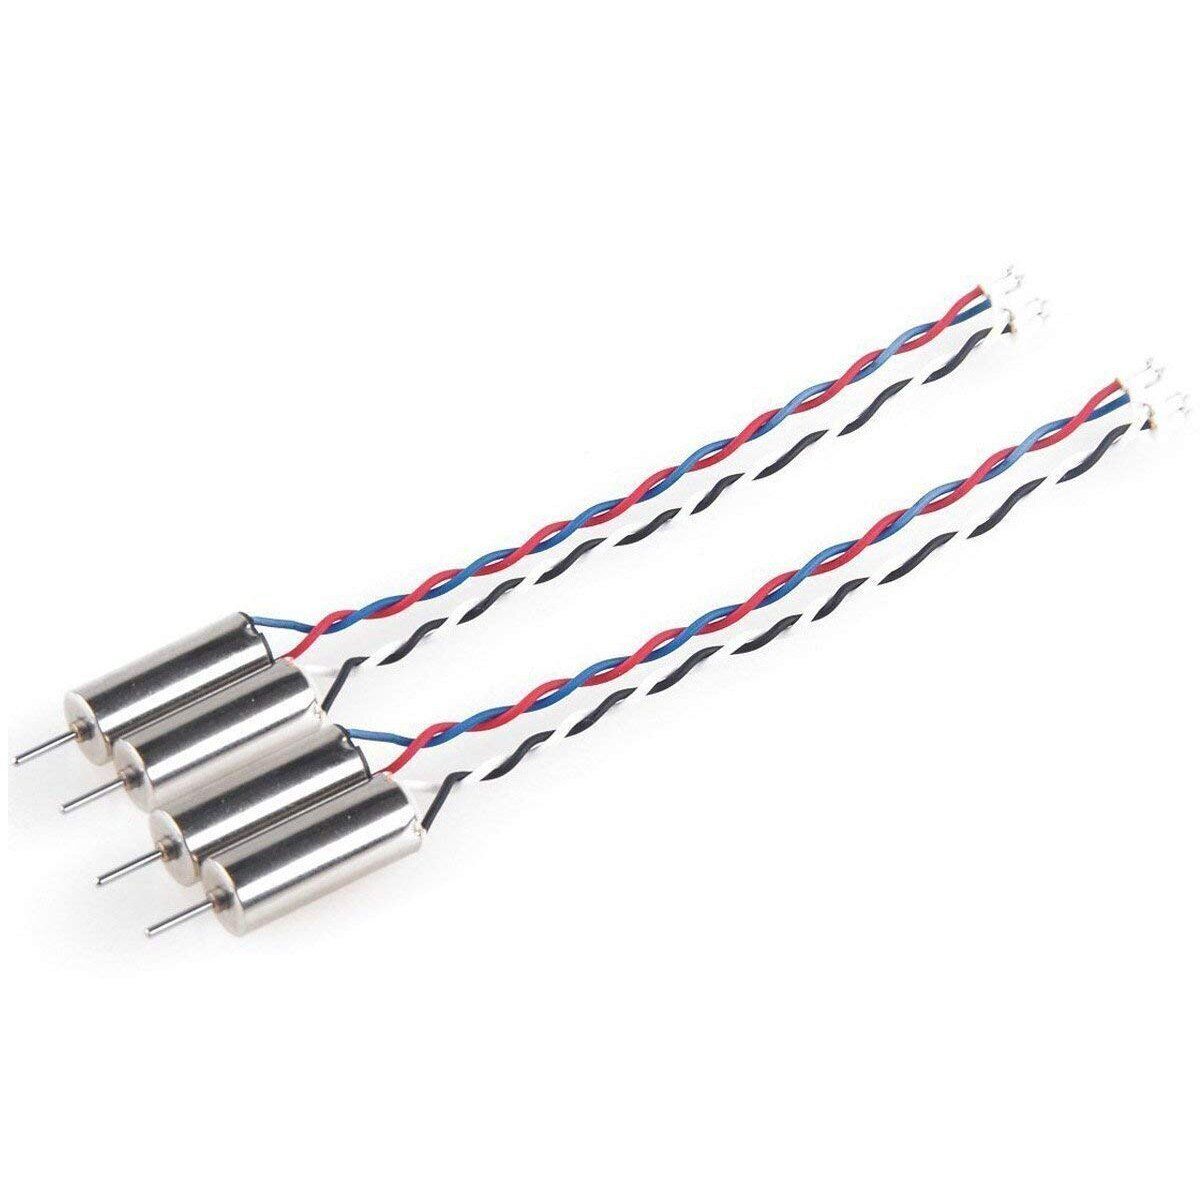 4pcs 615 Coreless Motor Special Sauce Edition for SNAPTAIN SP350 Blade Inductrix